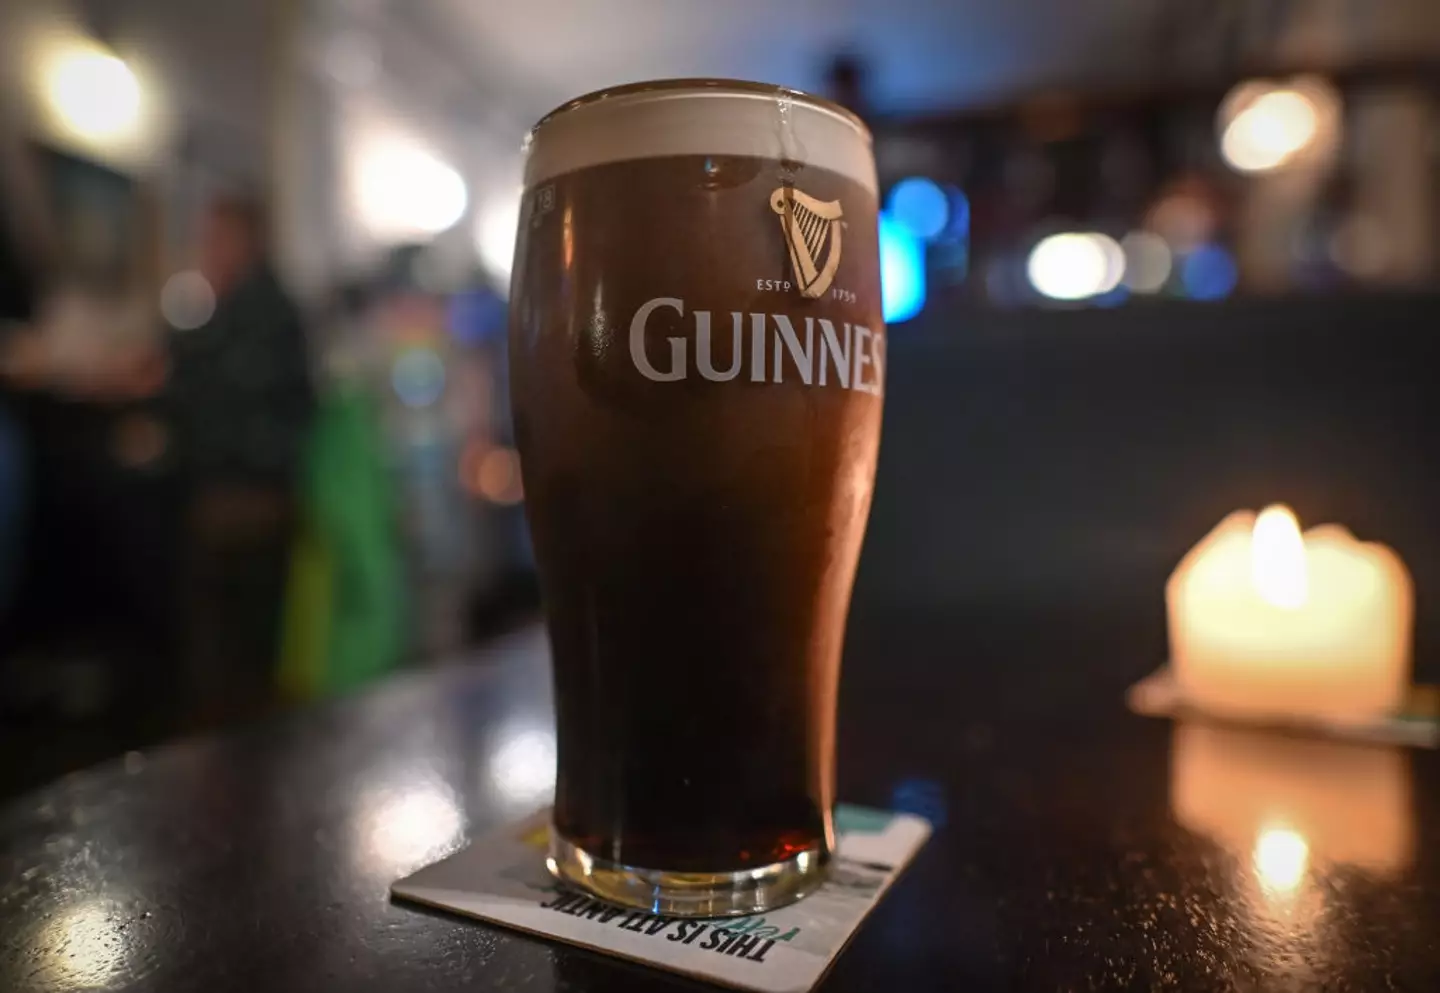 Guinness comes out on top in sales across all Wetherspoon pubs. (Artur Widak/NurPhoto via Getty Images)